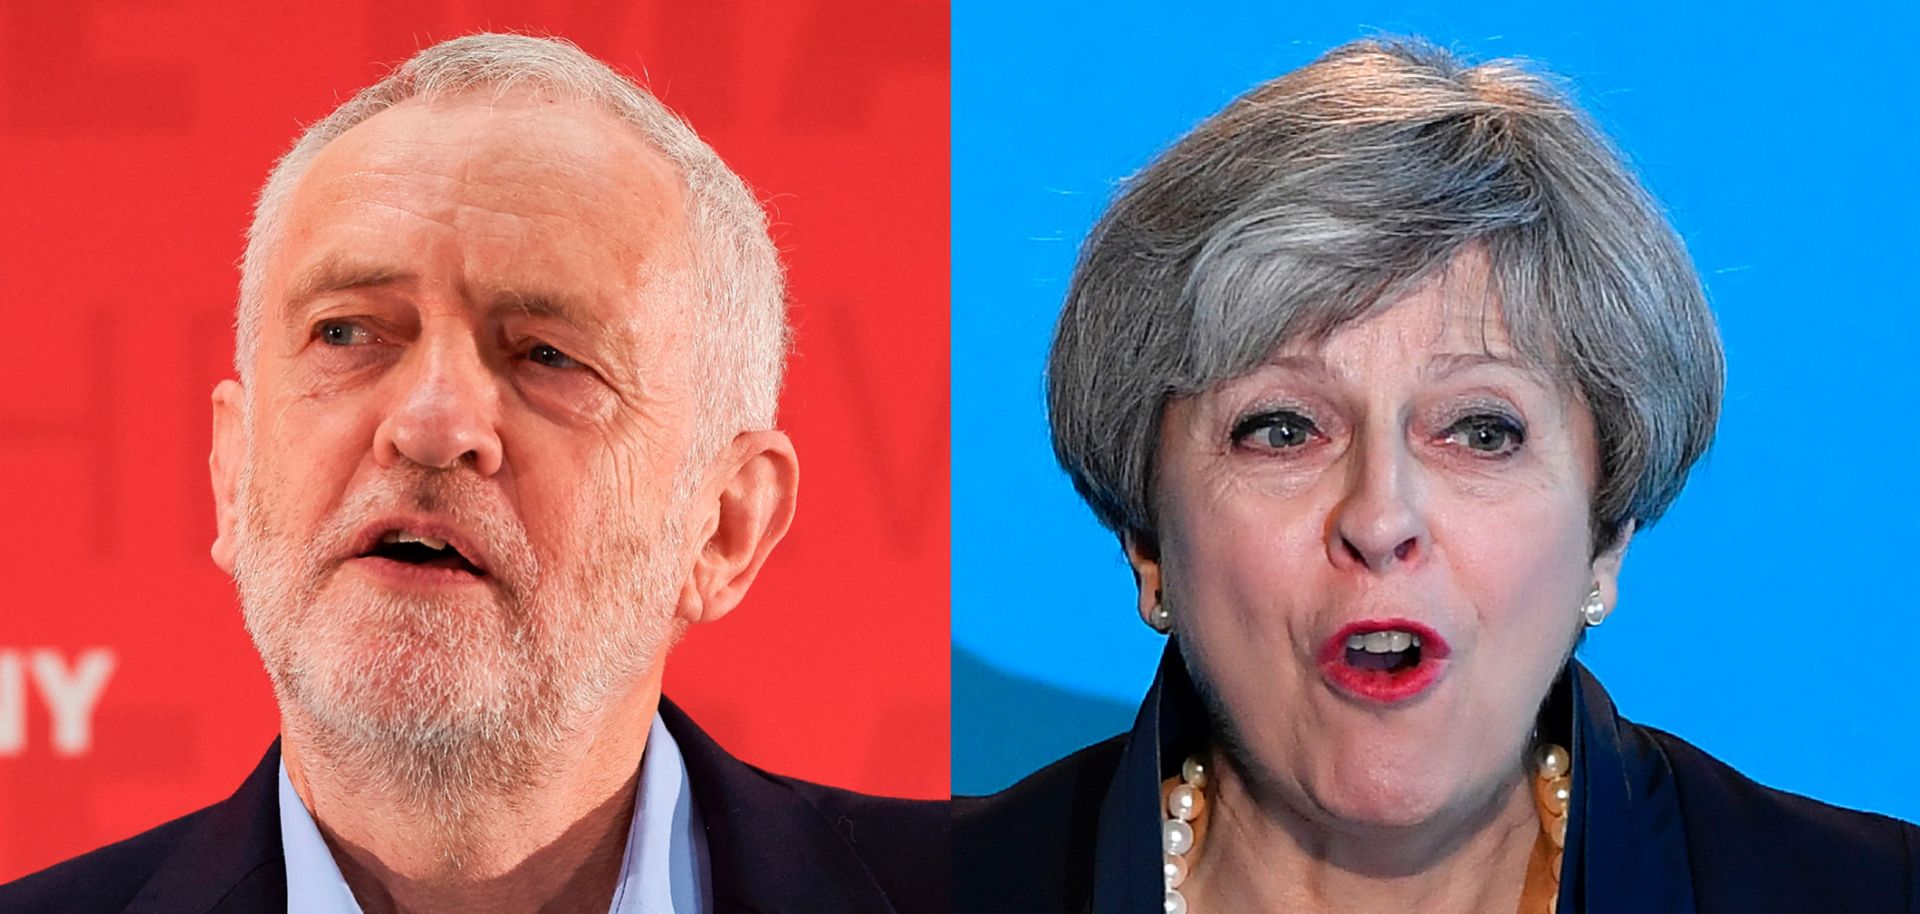 Prime Minister Theresa May (r), who called snap elections in the United Kingdom with the expectation that it would strengthen her Conservative Party's hand, may instead see Jeremy Corbyn's Labour Party rise in stature.